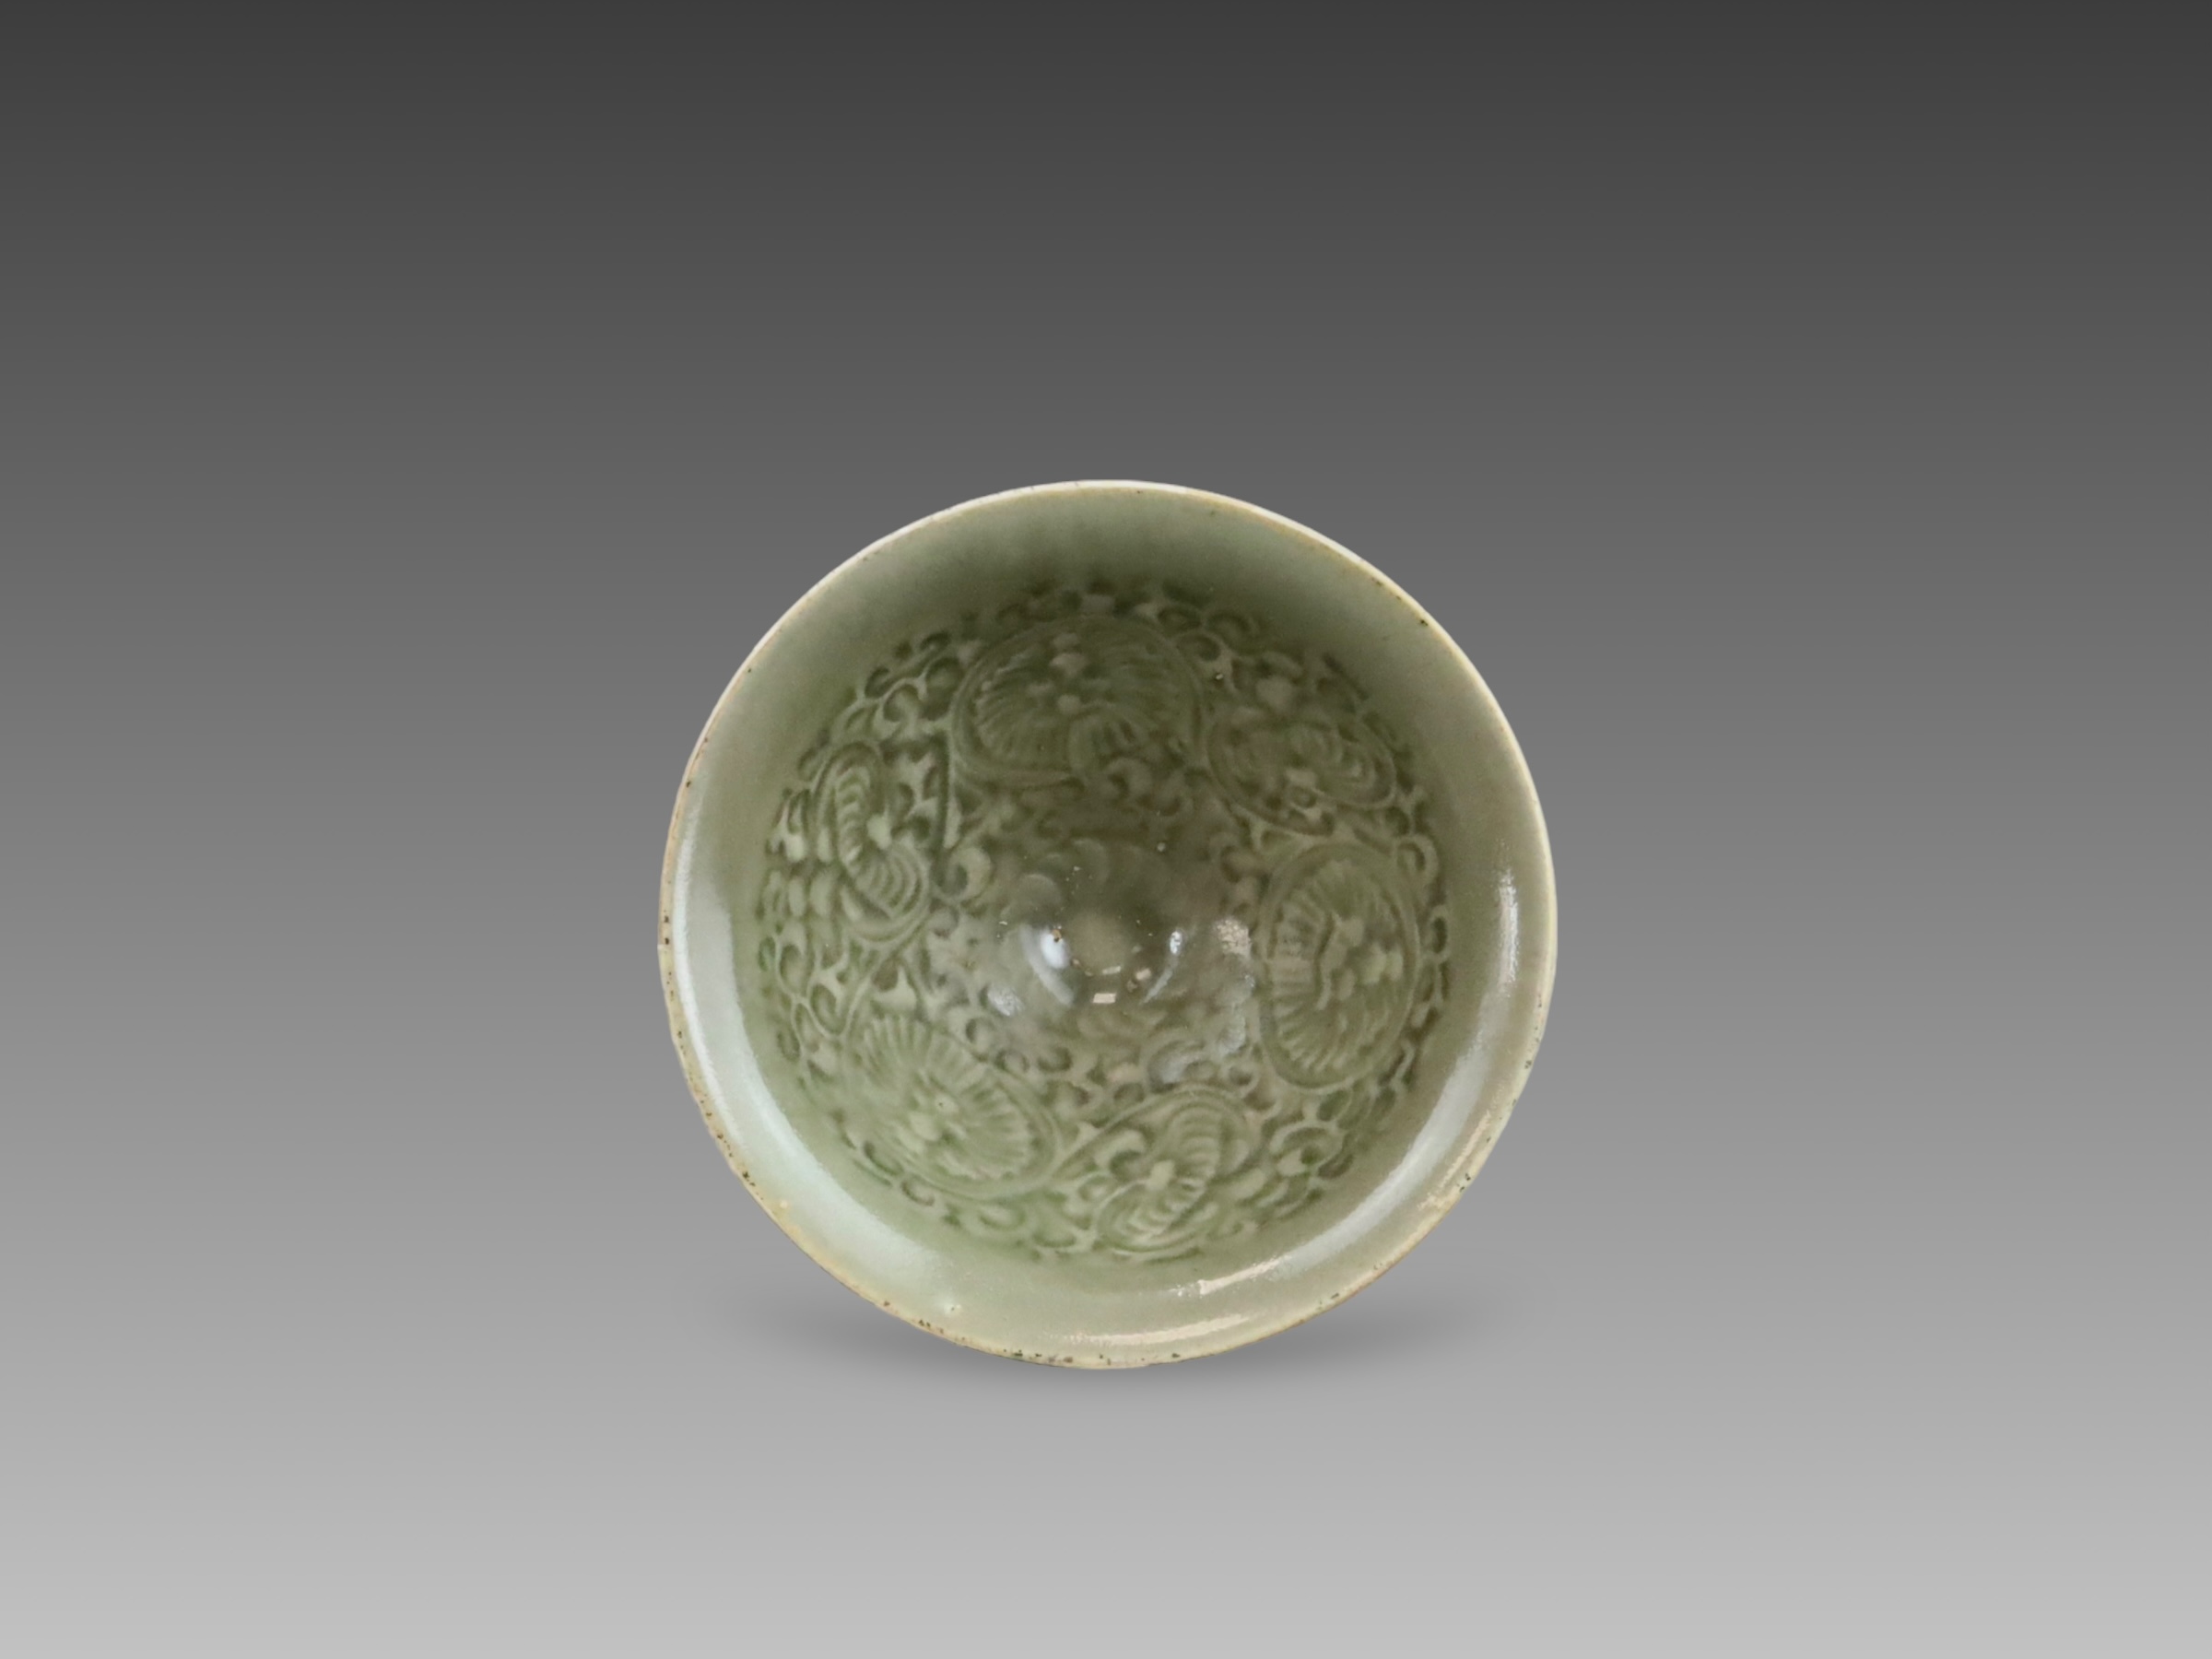 A Yaozhou Moulded Chrysanthemum Conical Bowl, Song dynasty, 